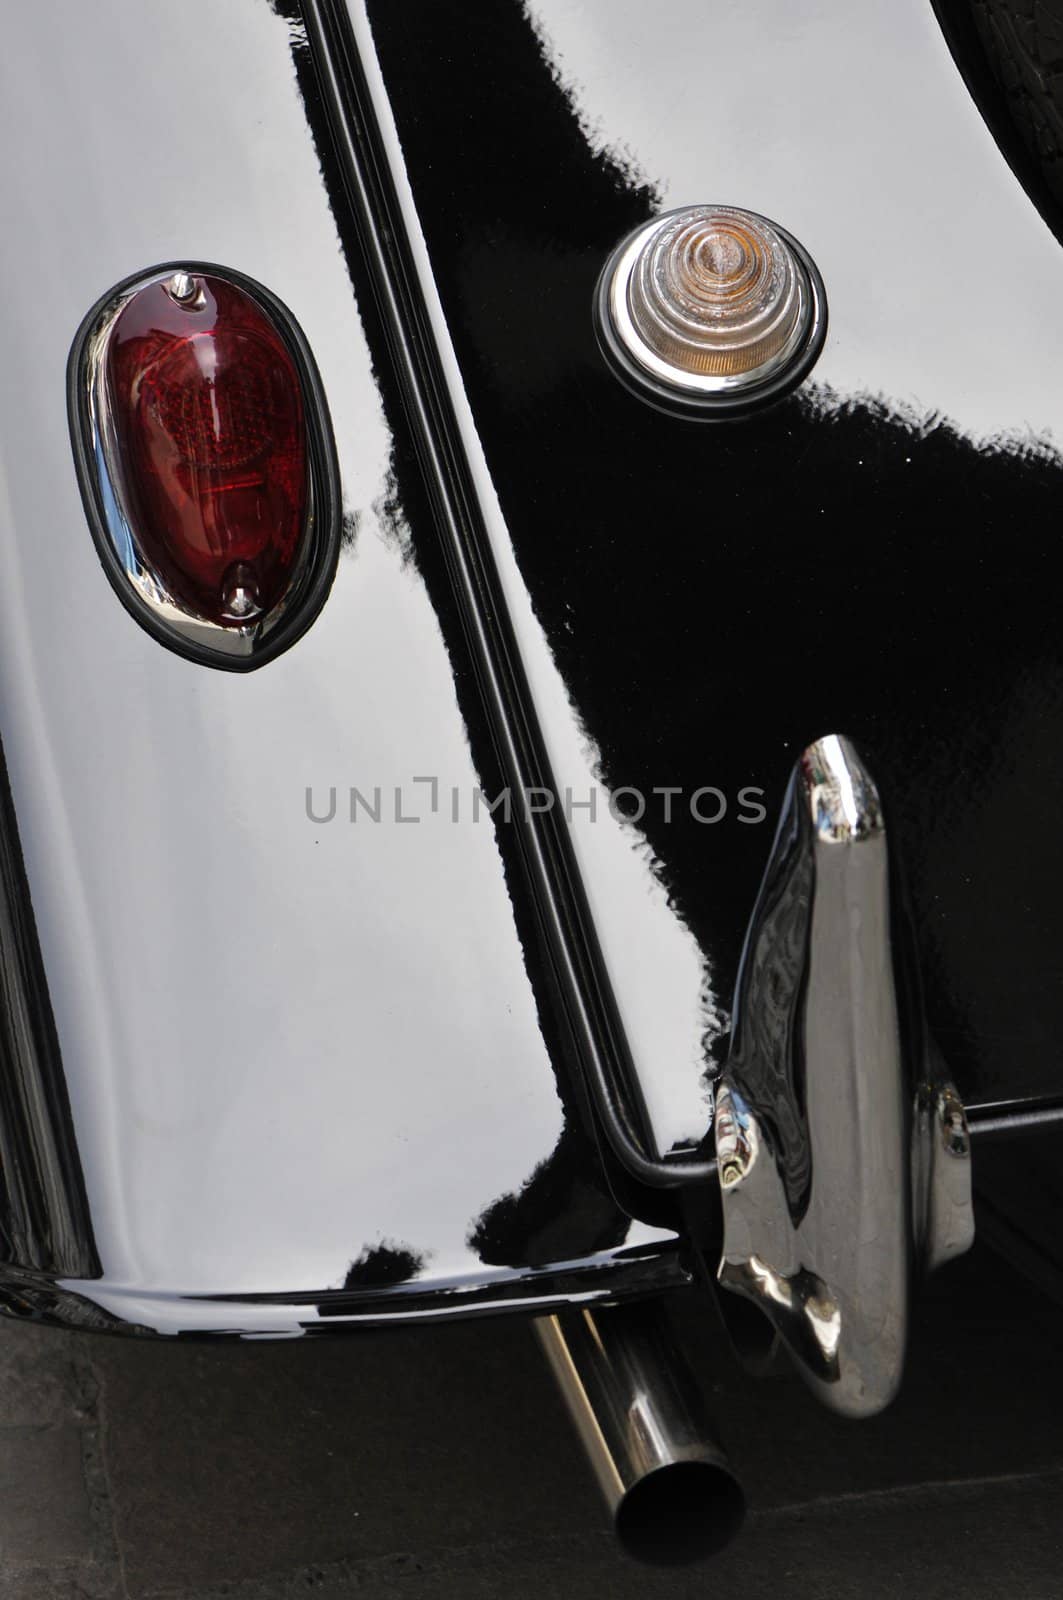 View of an old chromed backup light on a black Morgan car